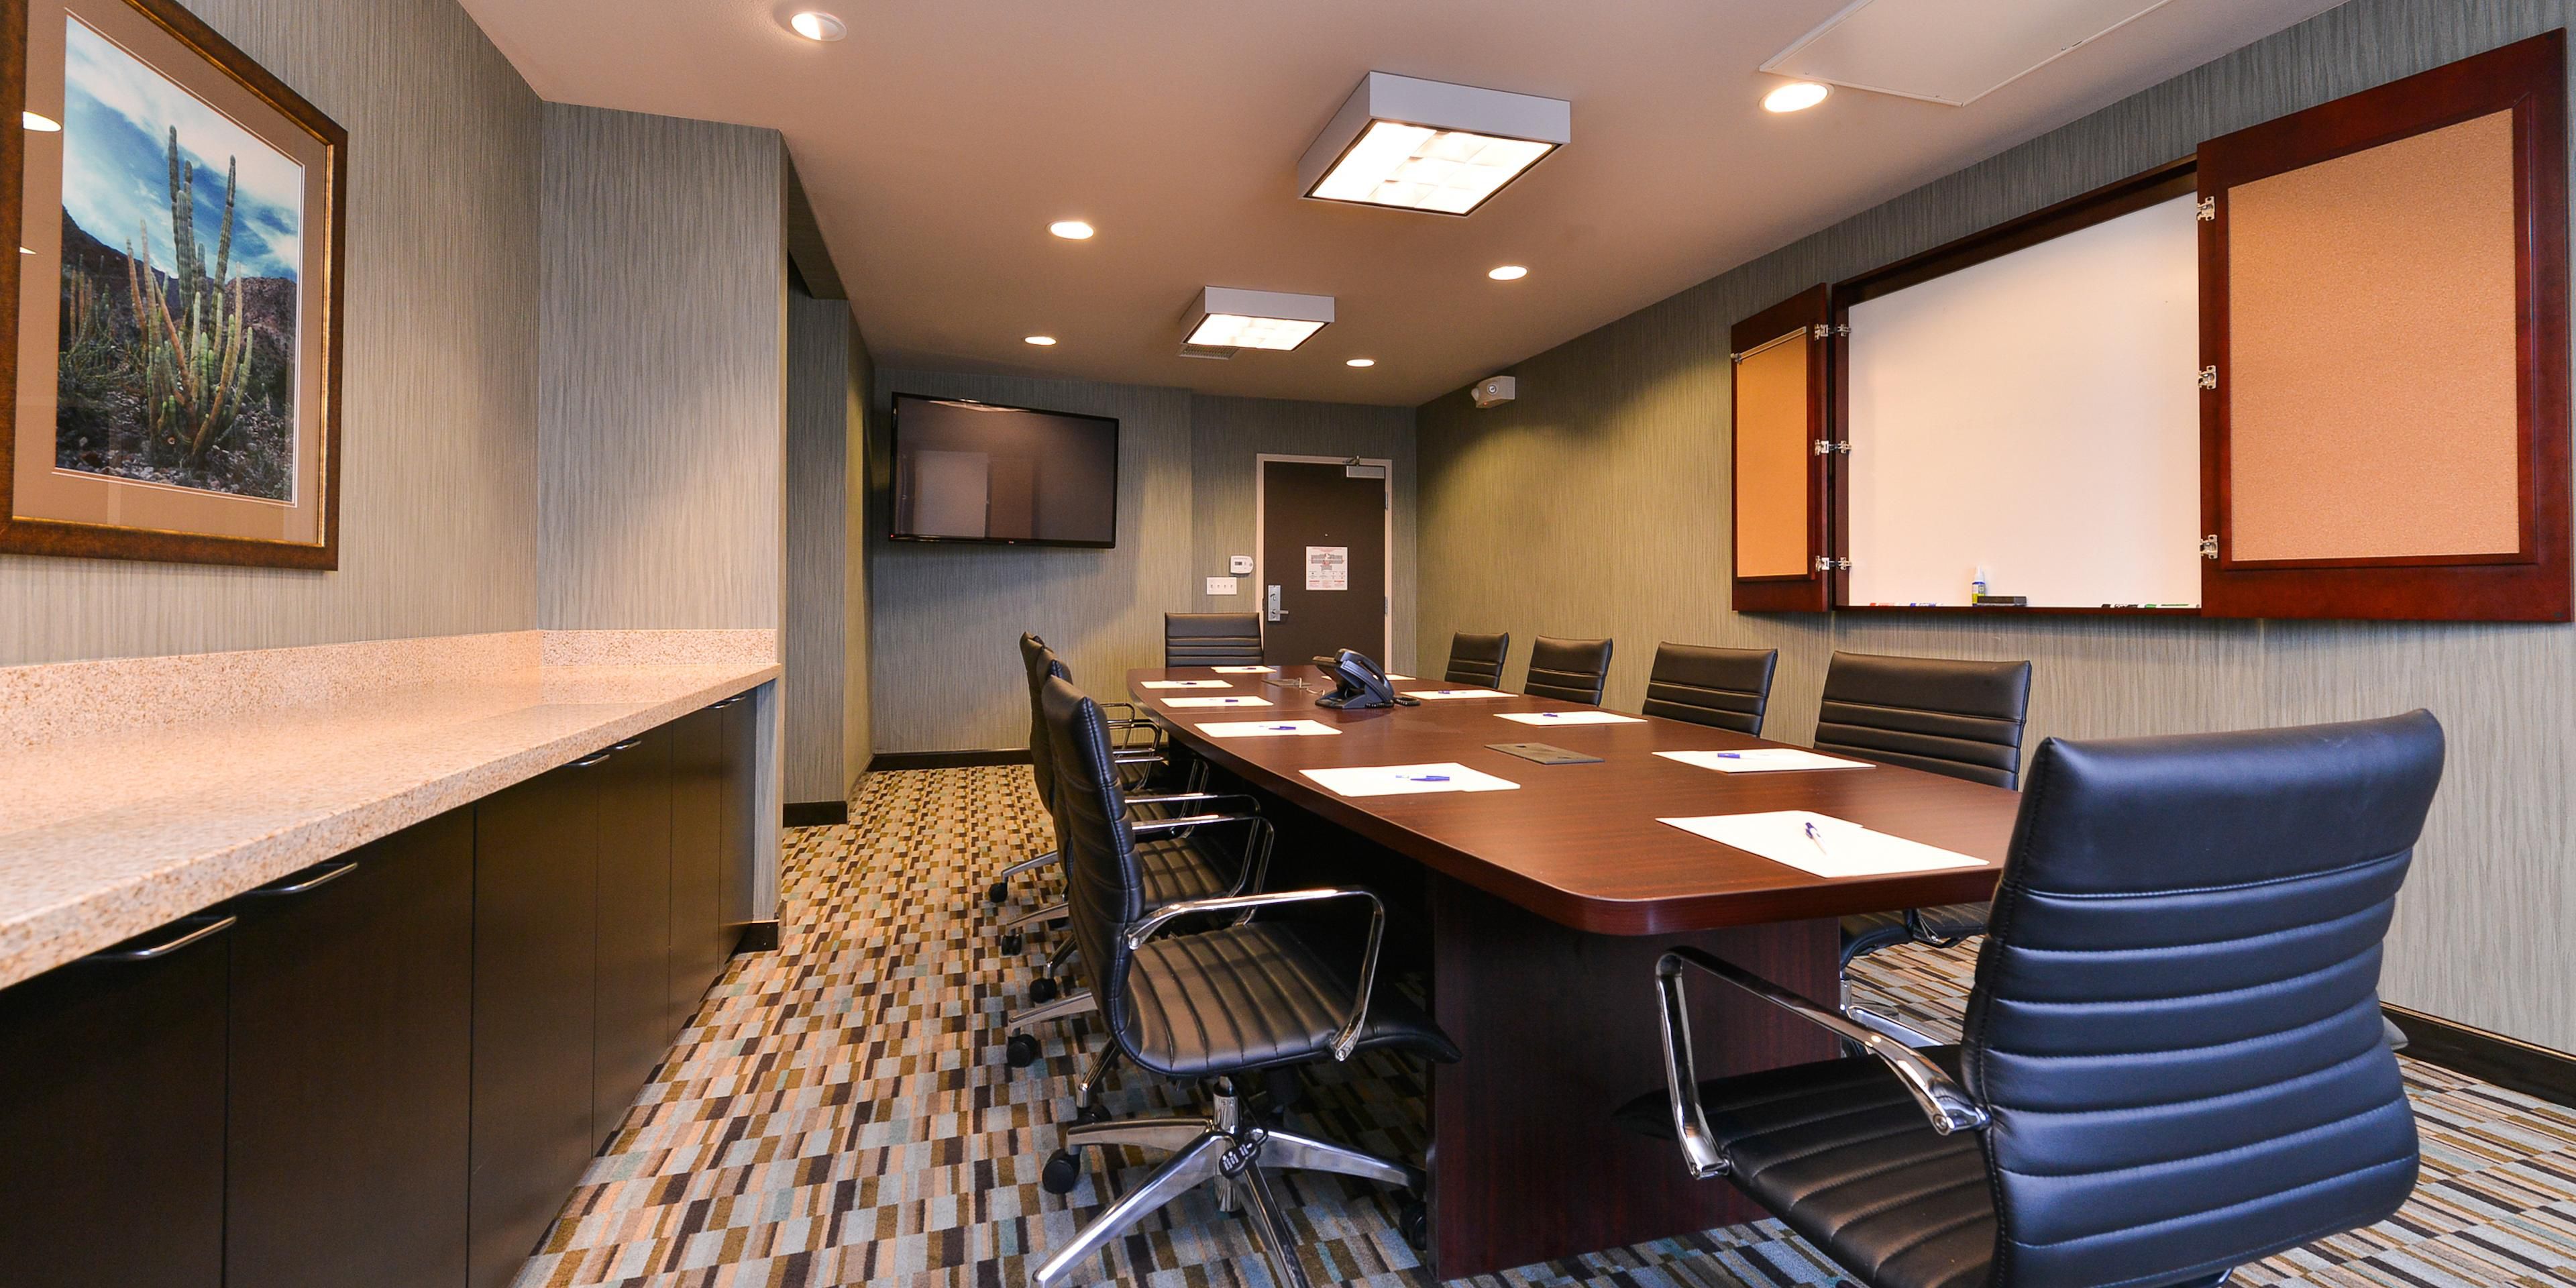 The Holiday Inn Express and Suites Indio's small meeting room is perfect for your needs. The space holds up to 12 people and can be used for business meetings and small events.